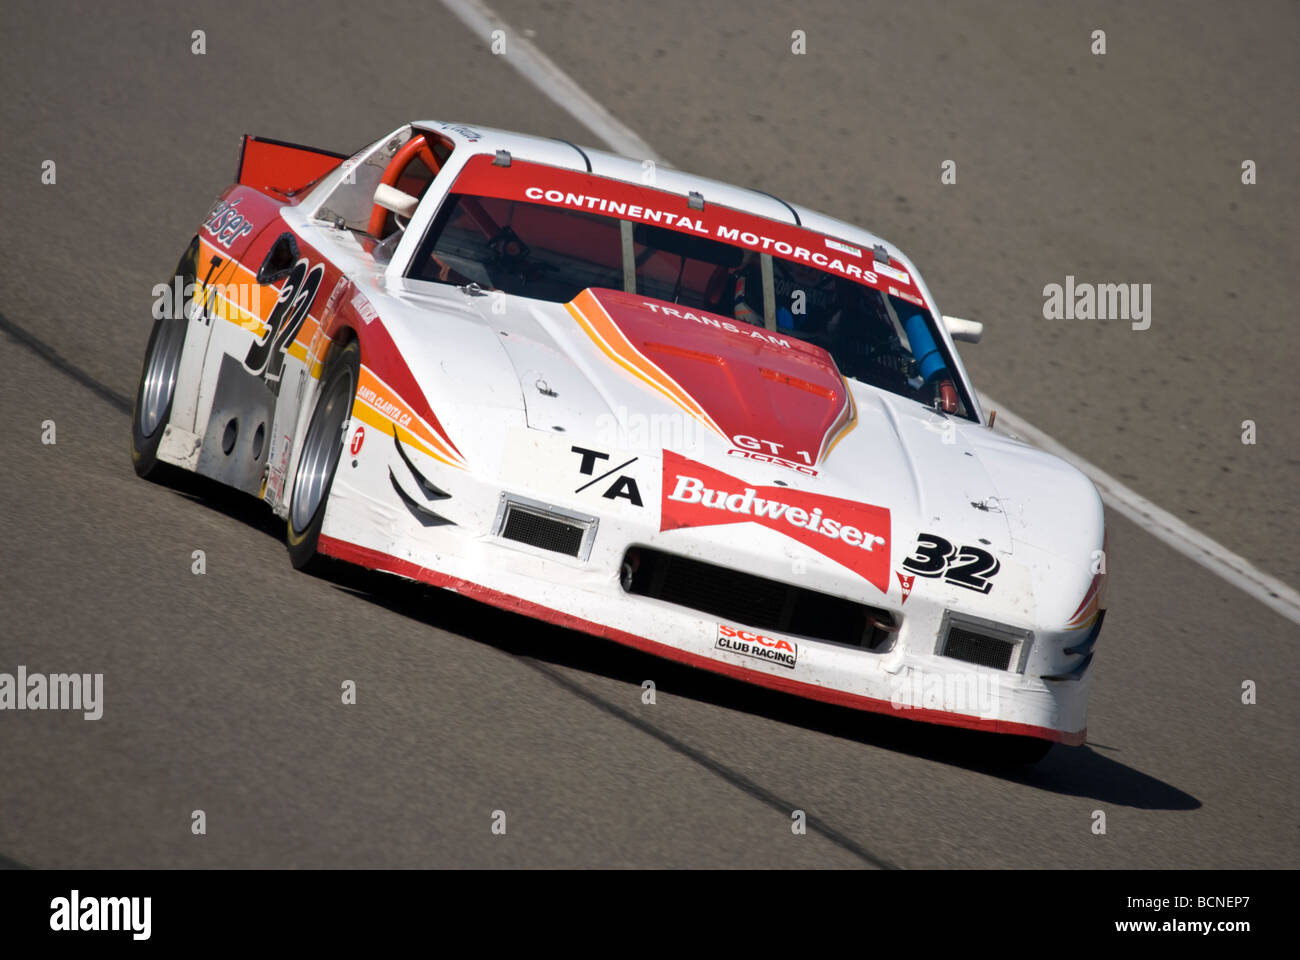 A 1986 Chevy Camaro GT-6 TransAm car at a vintage racing event. Stock Photo